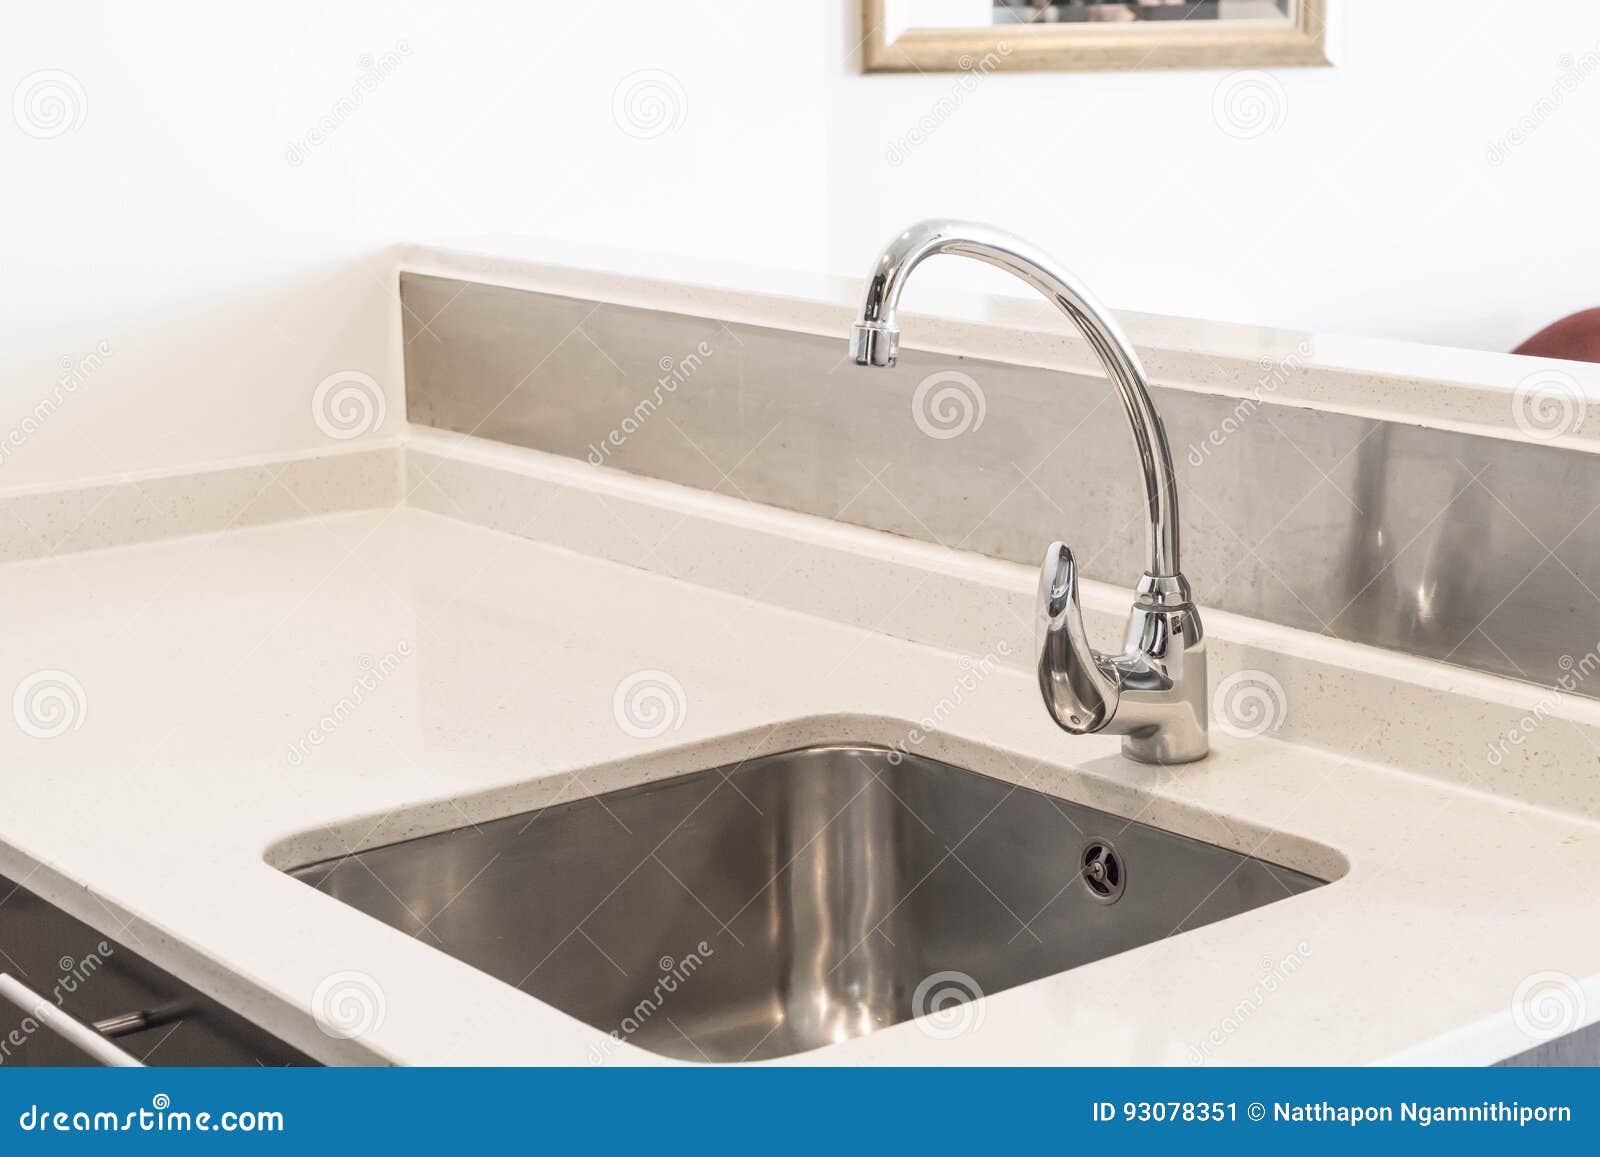 Faucet Sink and Water Tab Decoration in Kitchen Room Stock Image ...